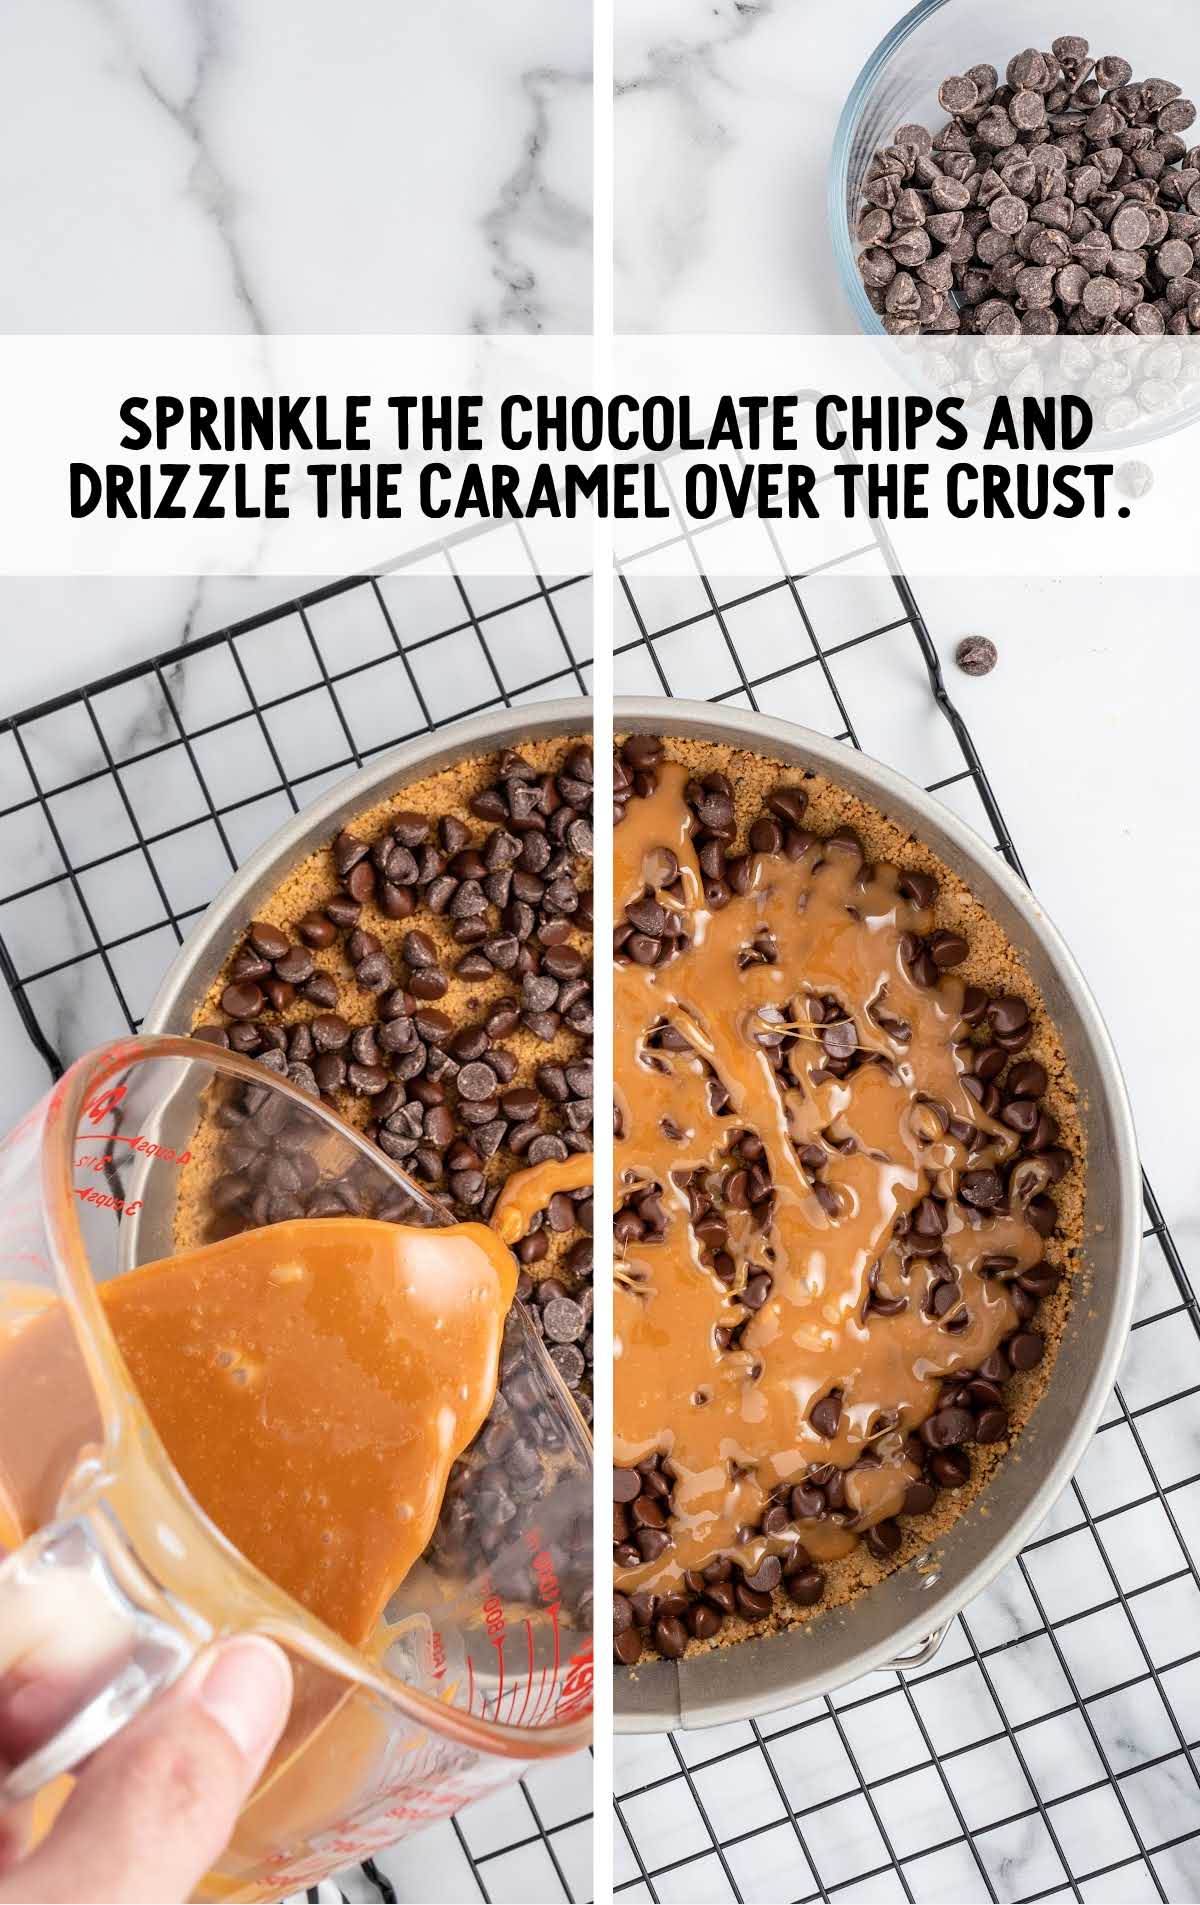 chocolate chip sprinkled over the crust and drizzle caramel over